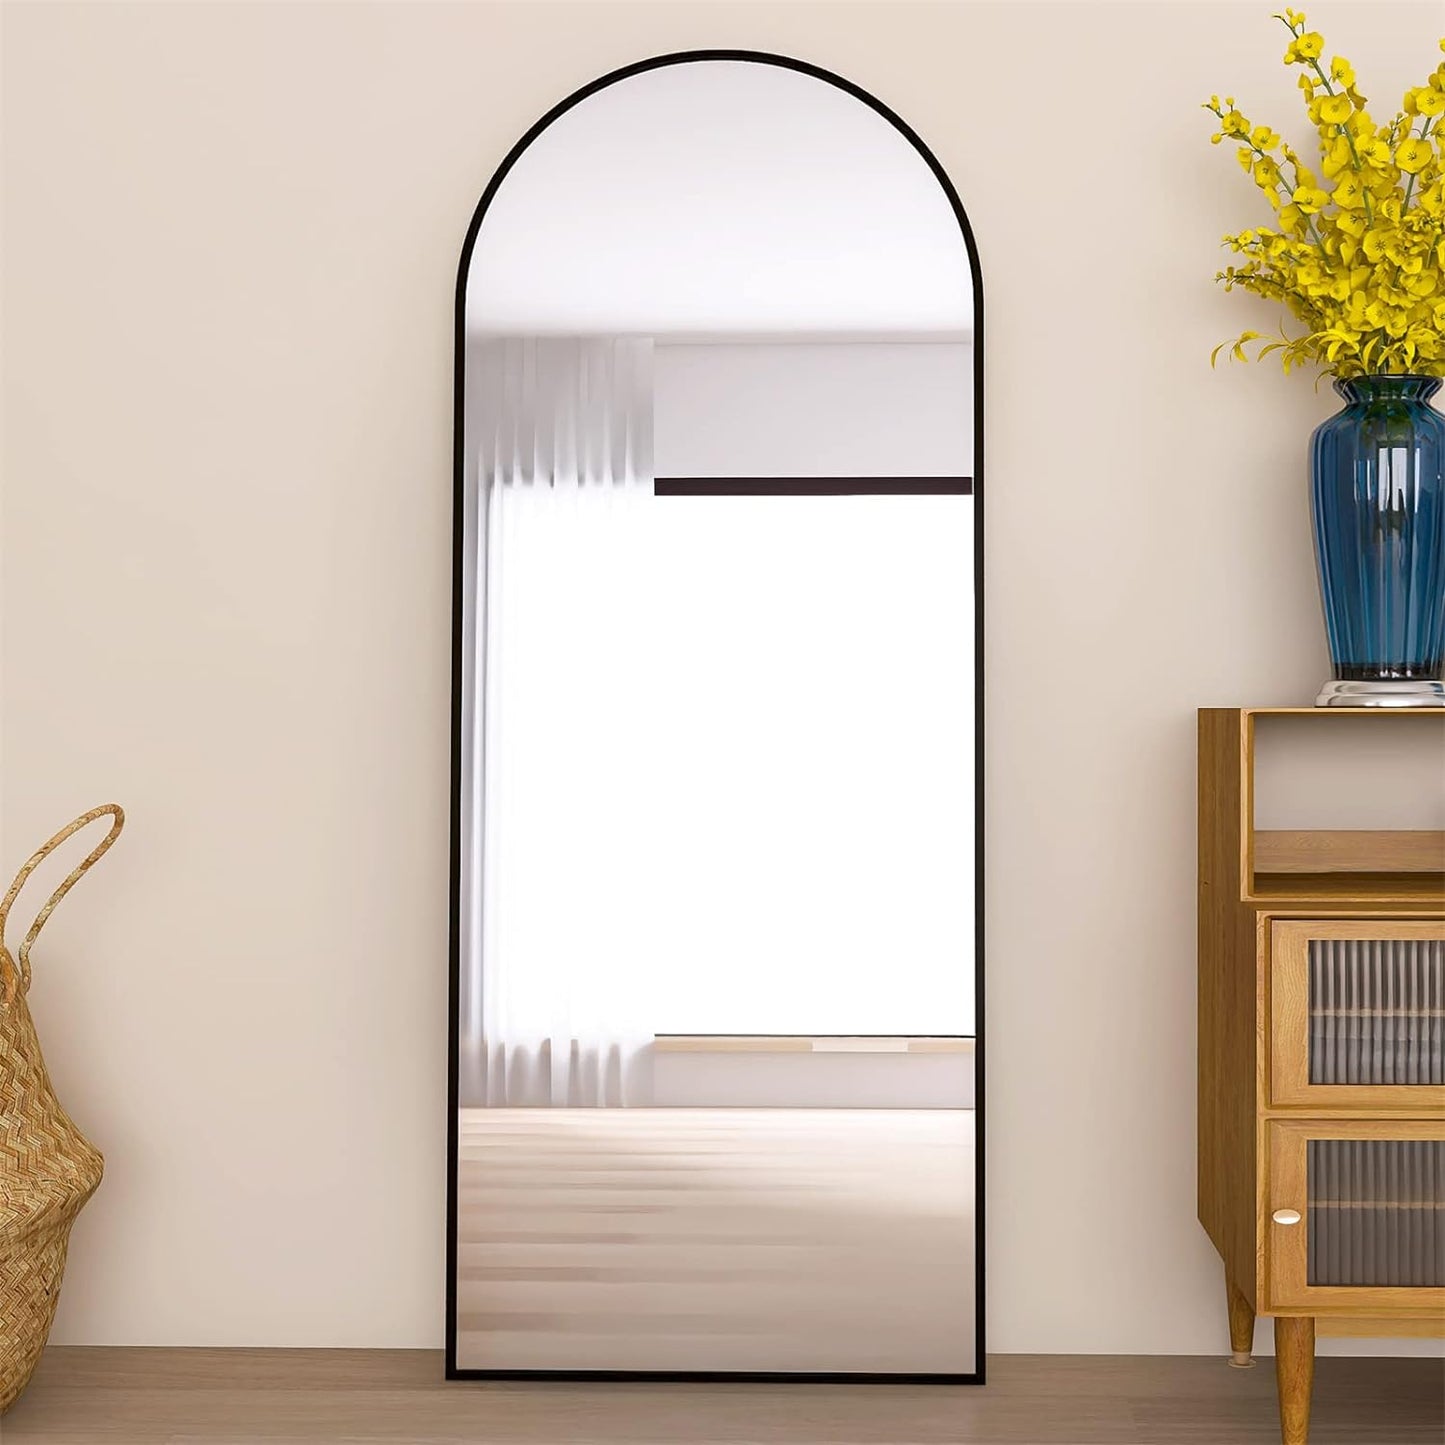 65"X24" Full Body Mirror, Arched Full Length Mirror Free Standing Leaning Mirror Hanging Mounted Mirror Aluminum Frame Modern Tall Mirrors for Living Room Bedroom Cloakroom, Black